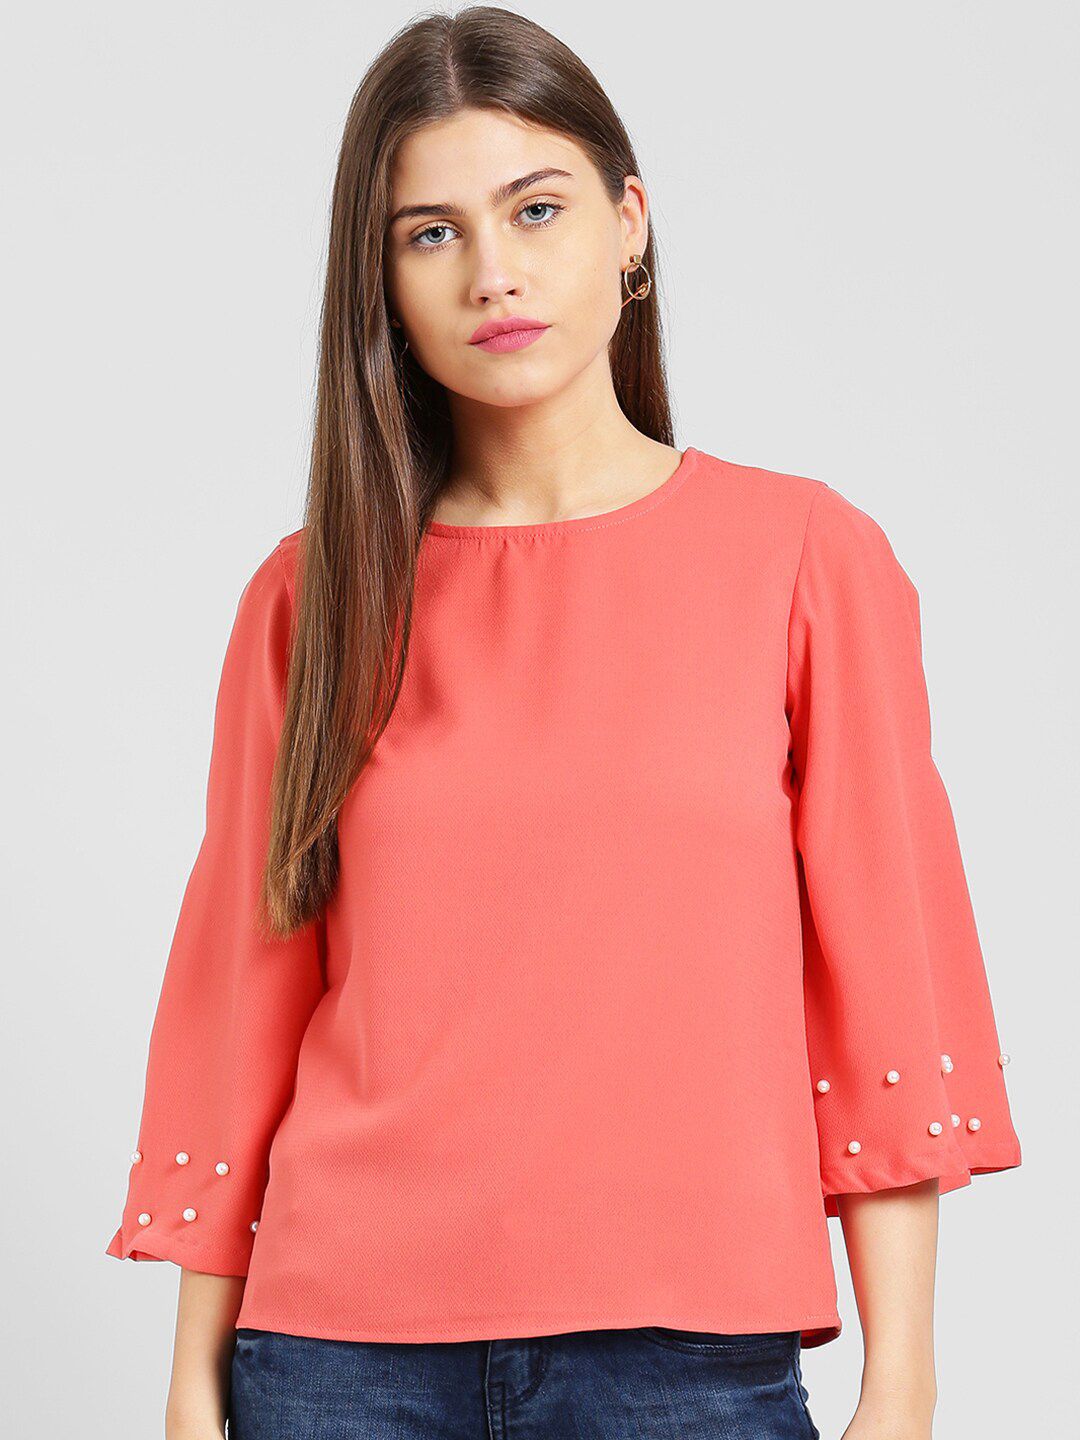 Be Indi Women Coral Embellished Top Price in India